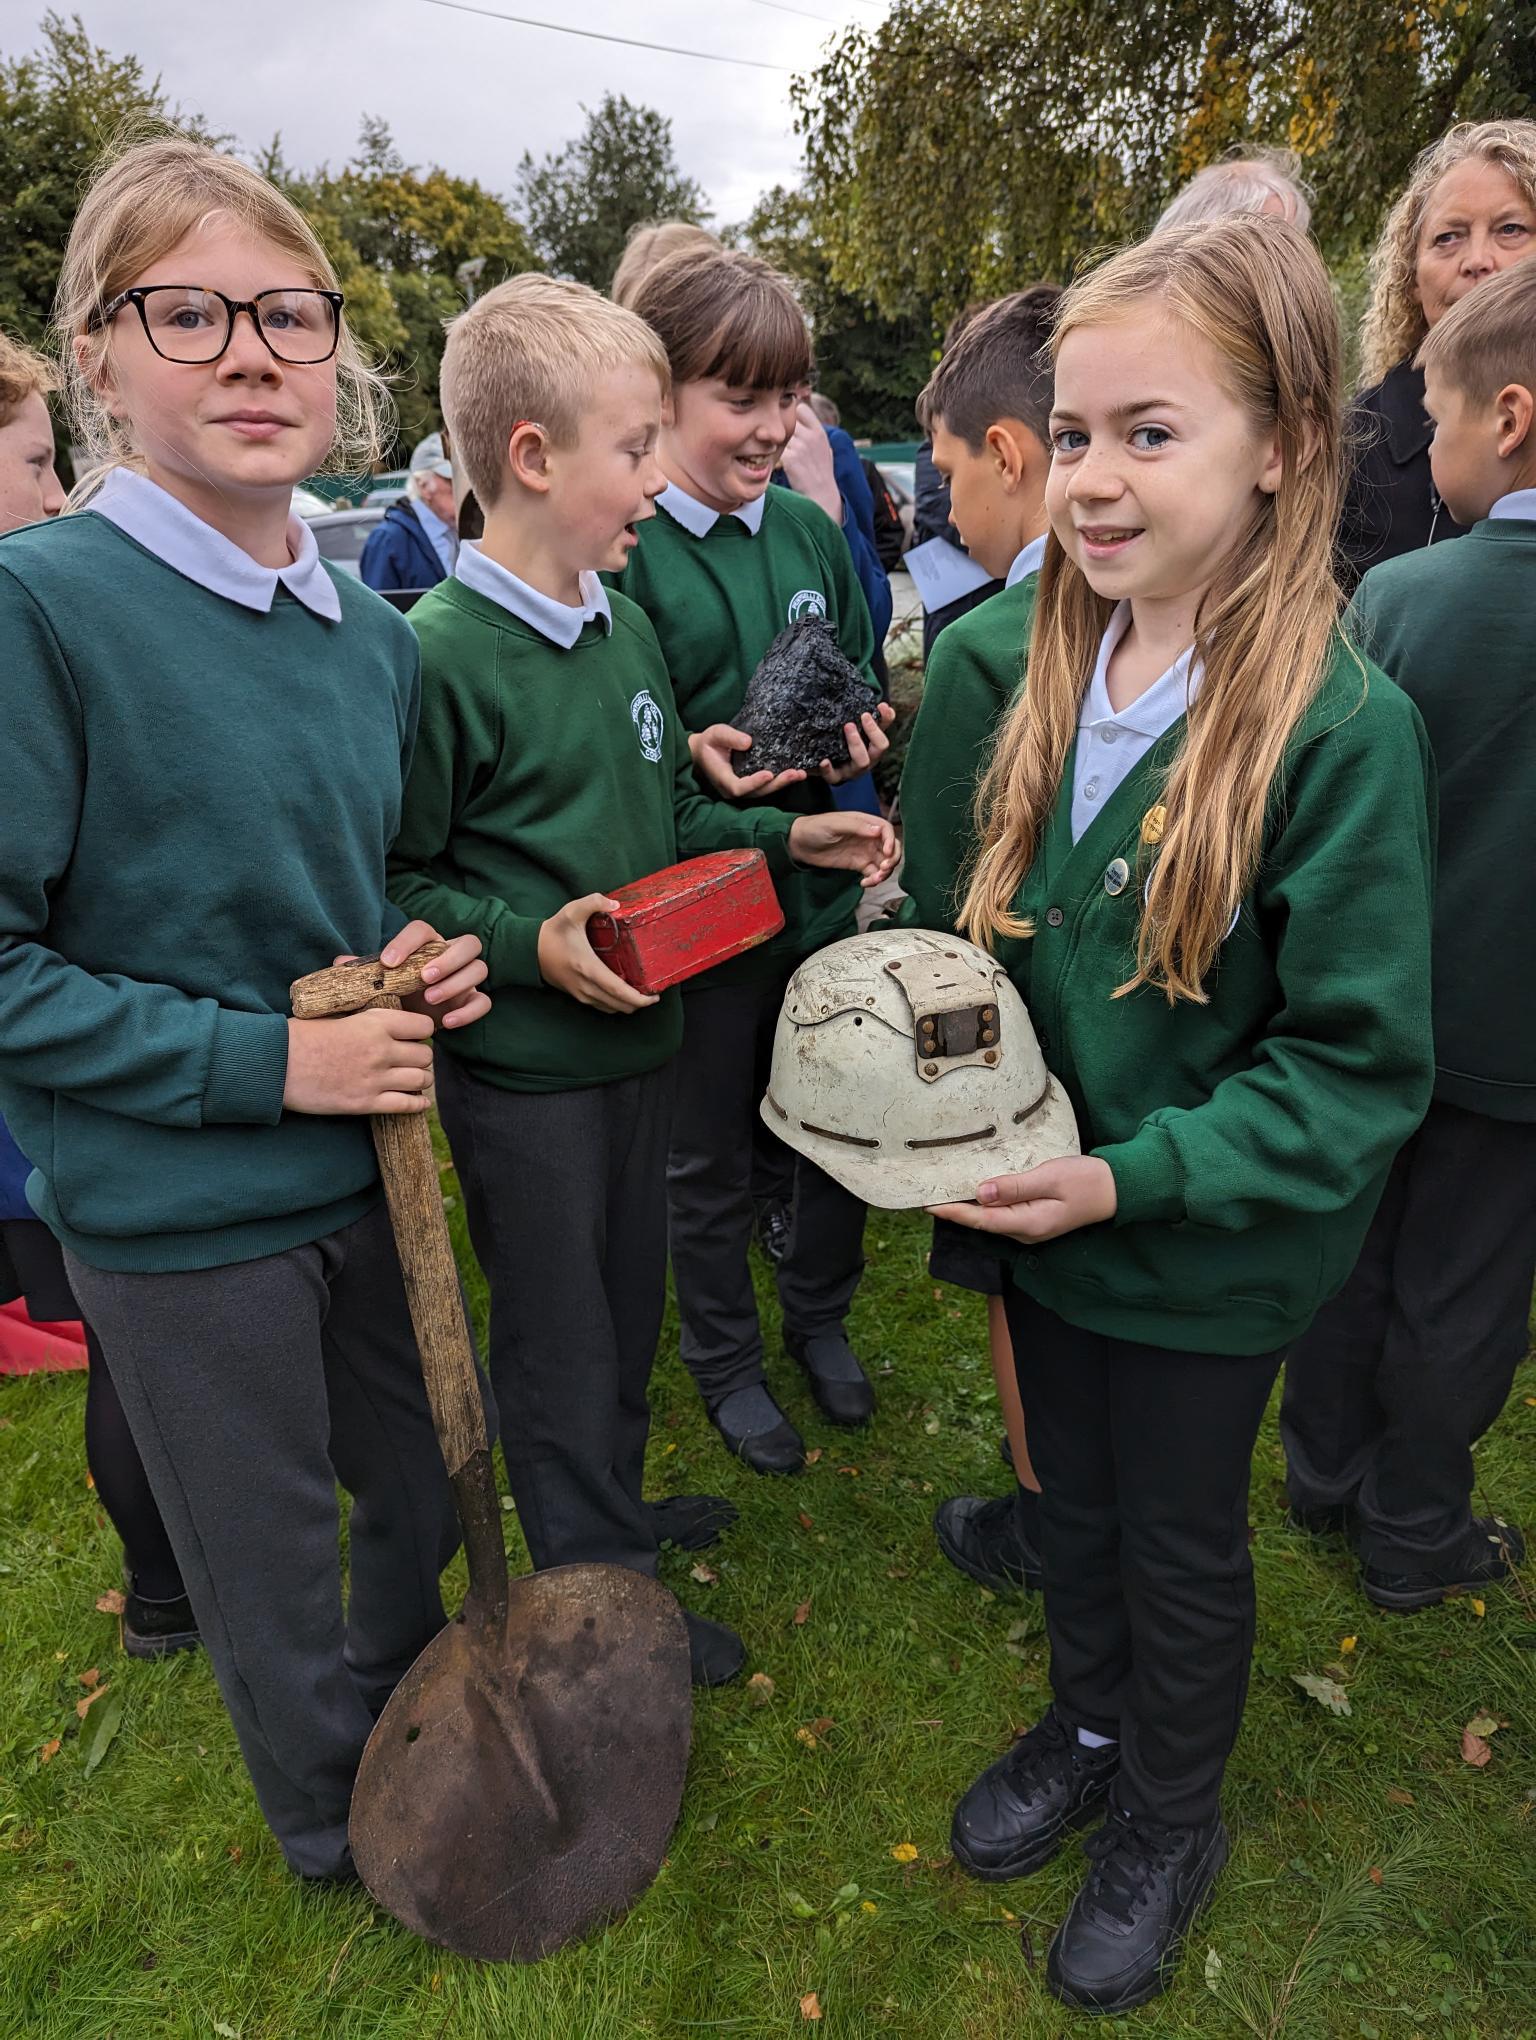 Ysgol Penygelli children with artefacts at the Gresford Disaster memorial service.